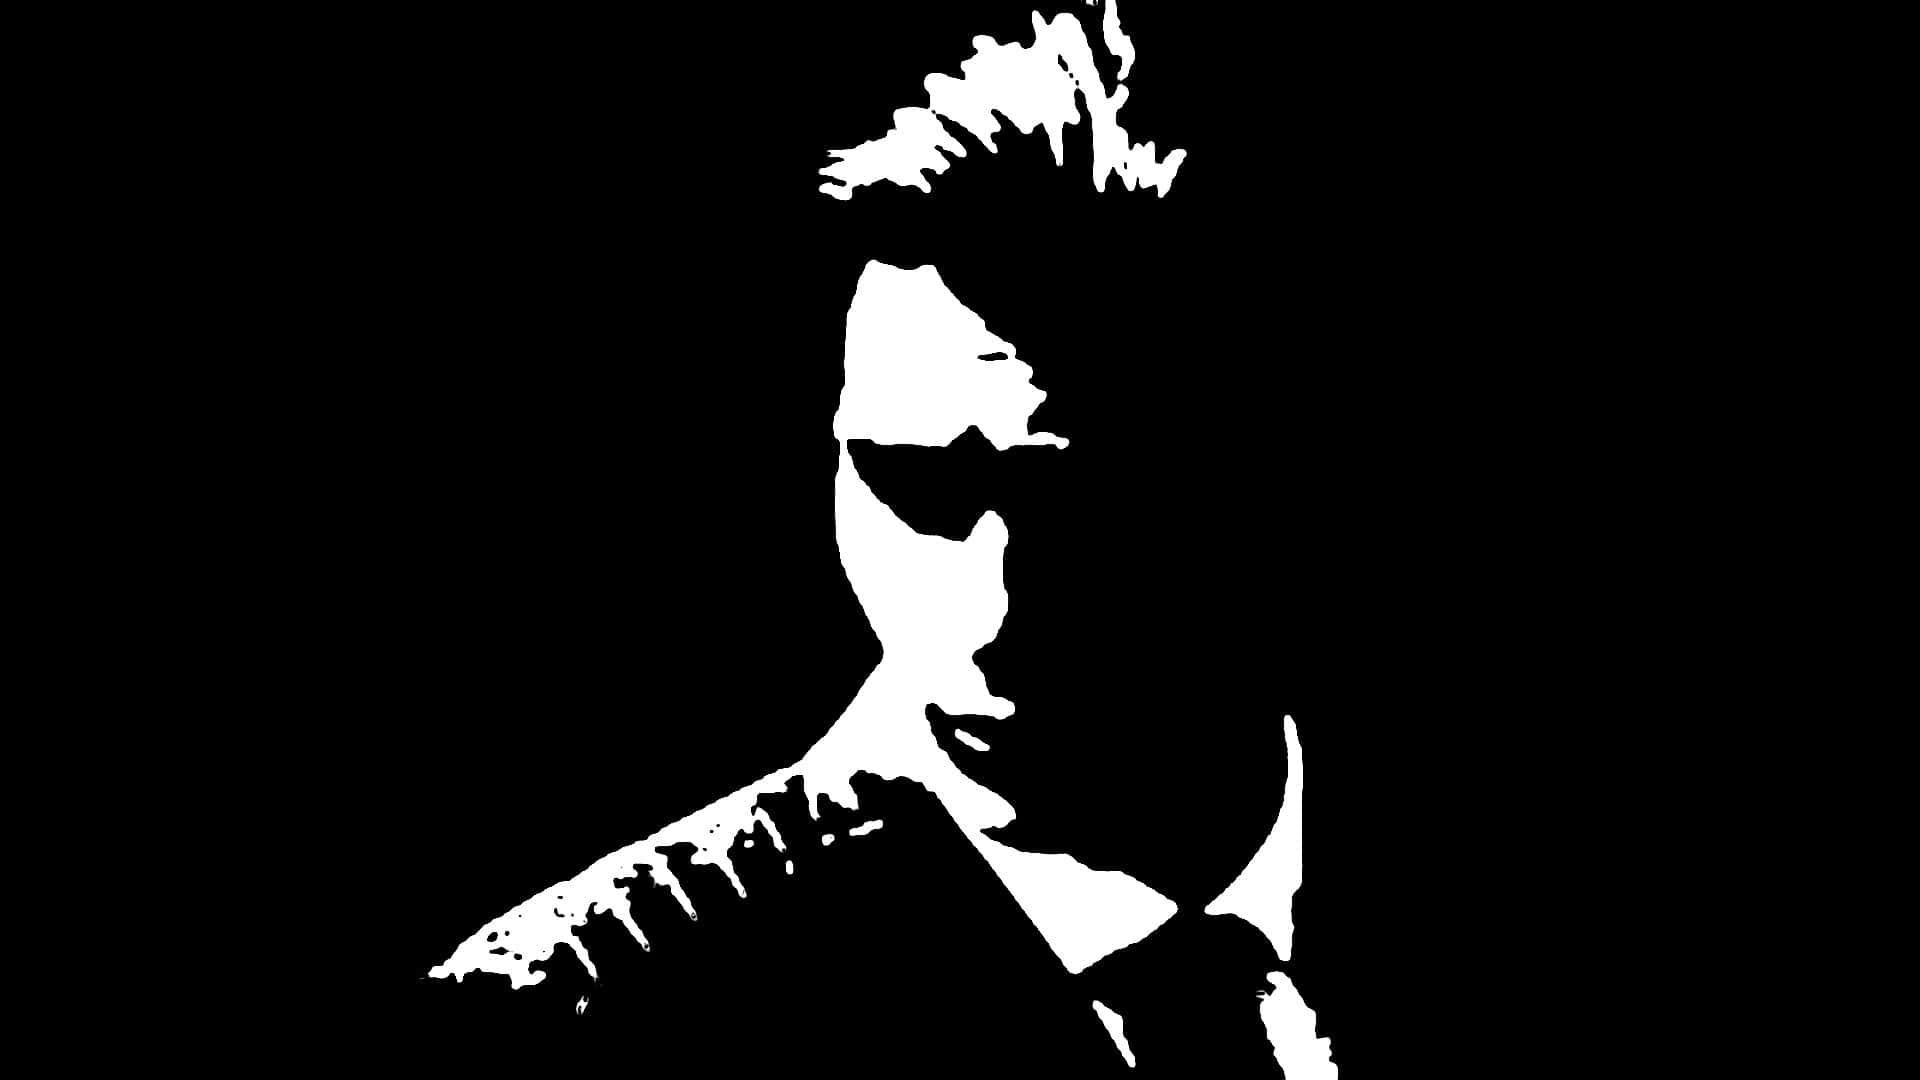 Iconic Movie Character Silhouette Wallpaper